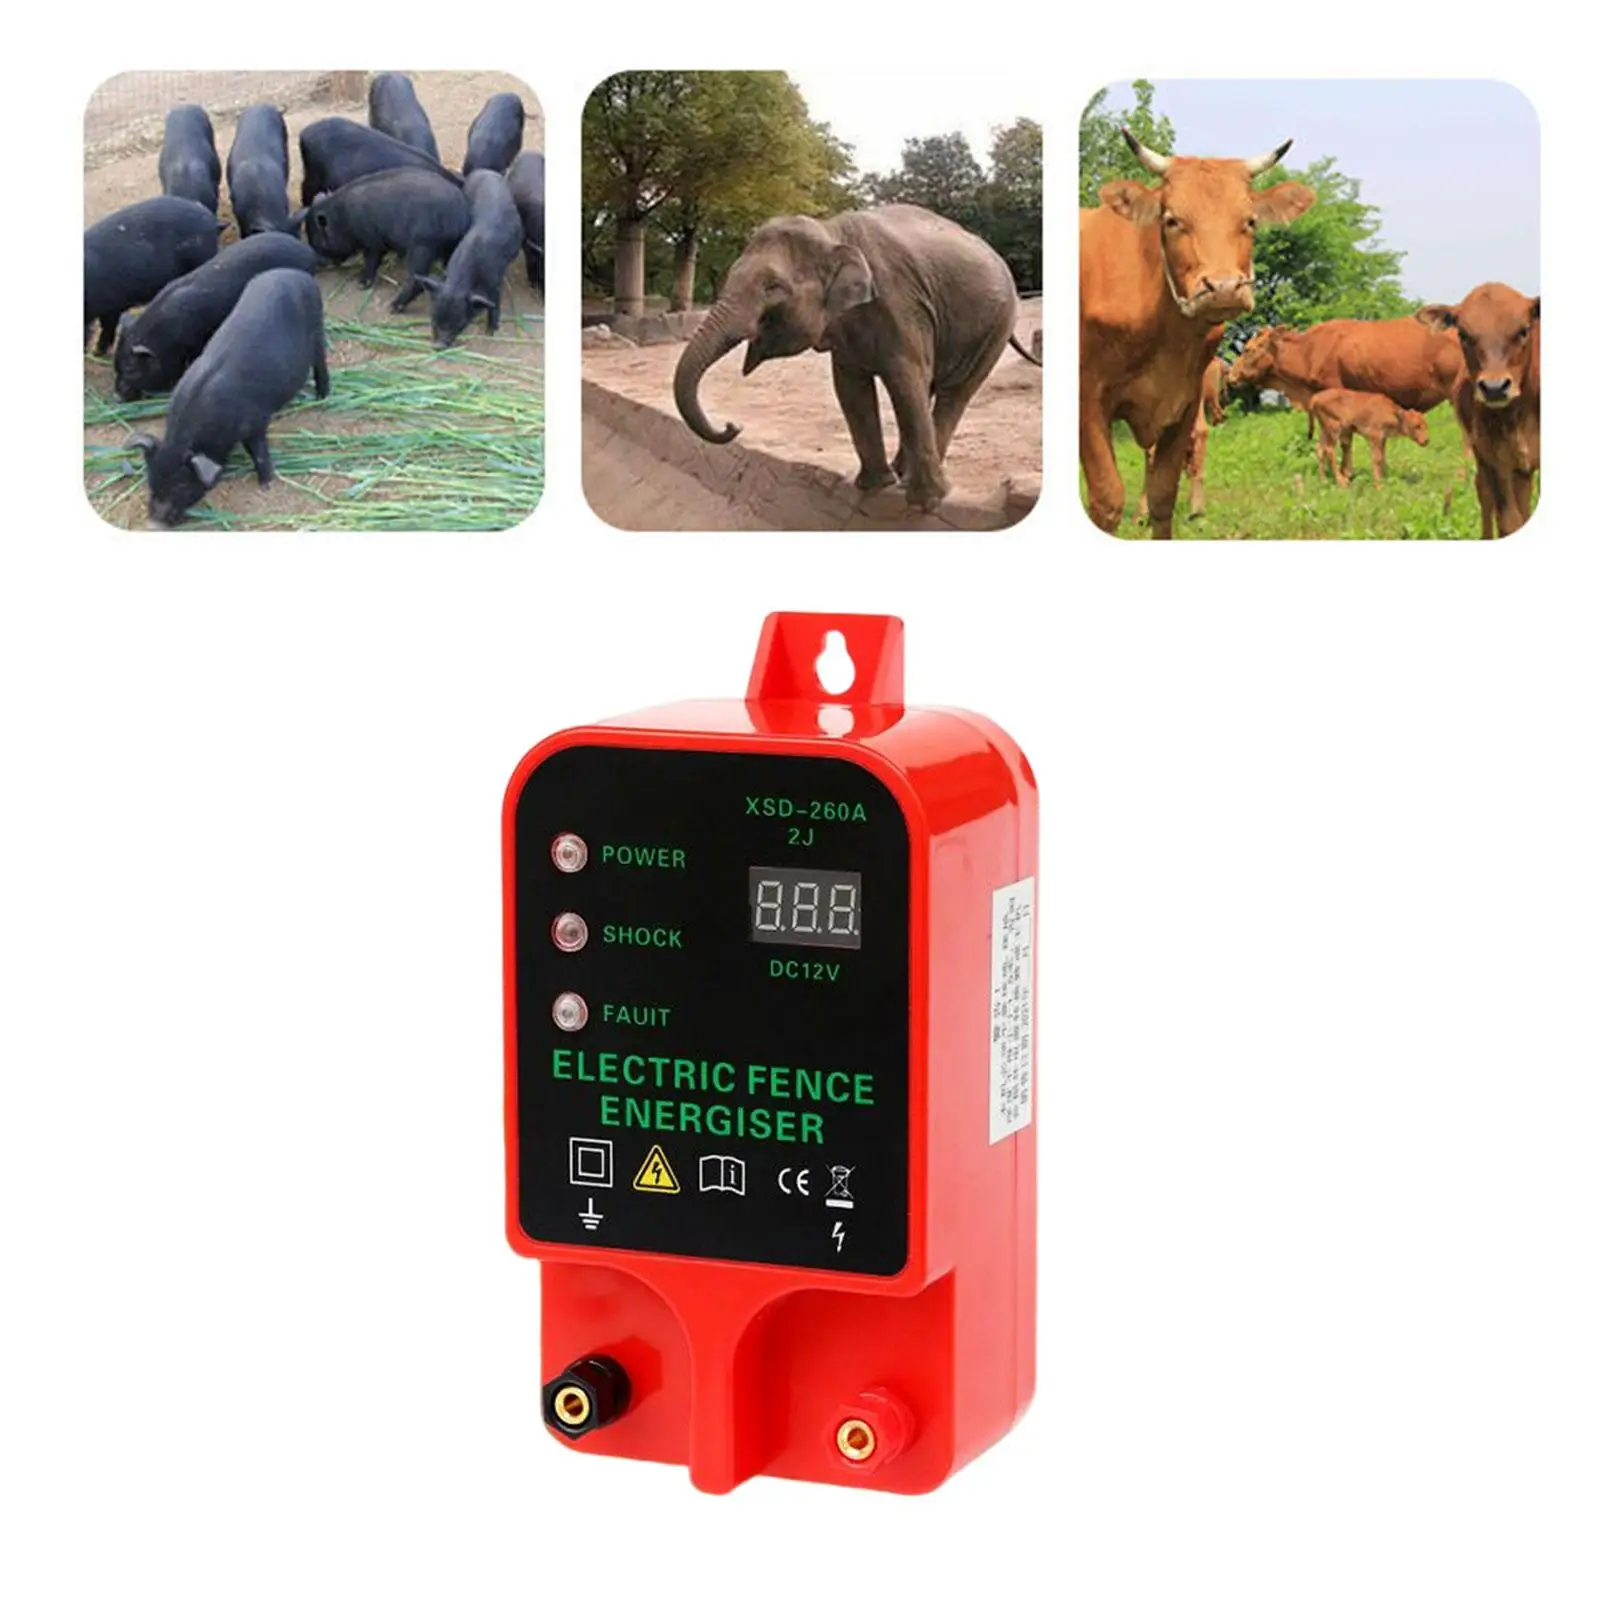 Electric Fence Controller EU Plug Xsd-260B Waterproof for Farm Agricultural Fencing